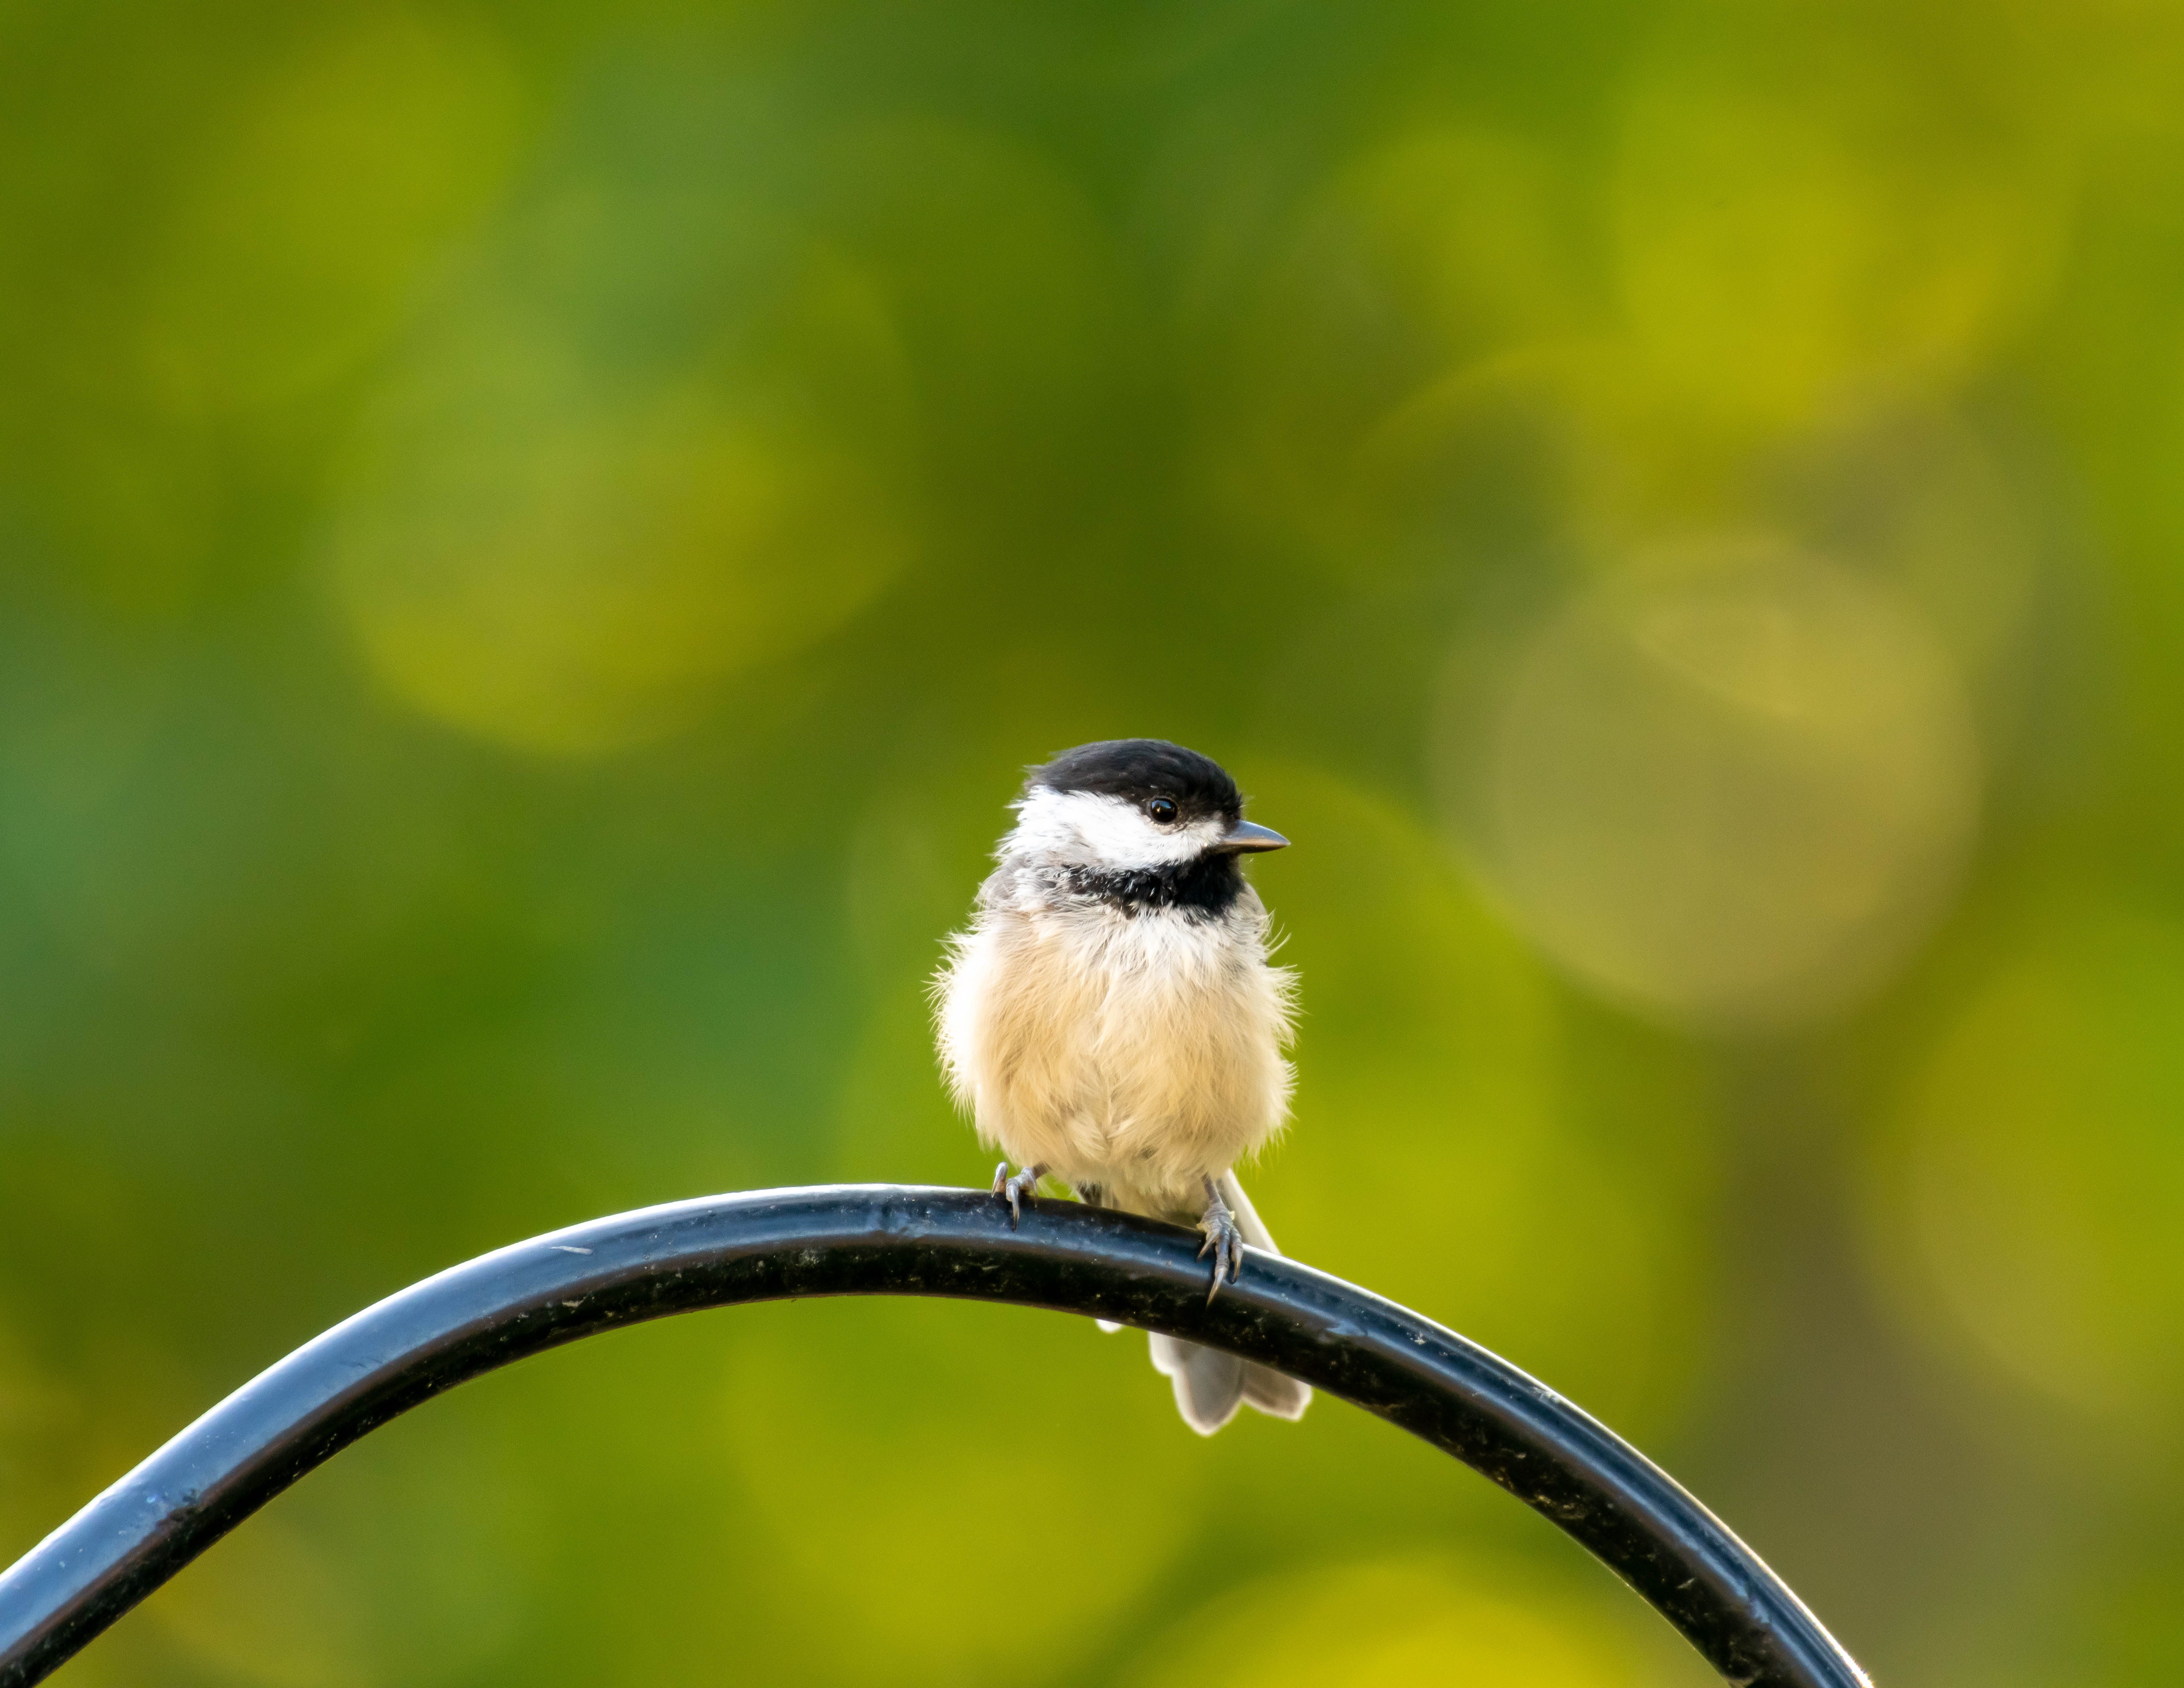 Black Capped Chickadee Picture. Download Free Image